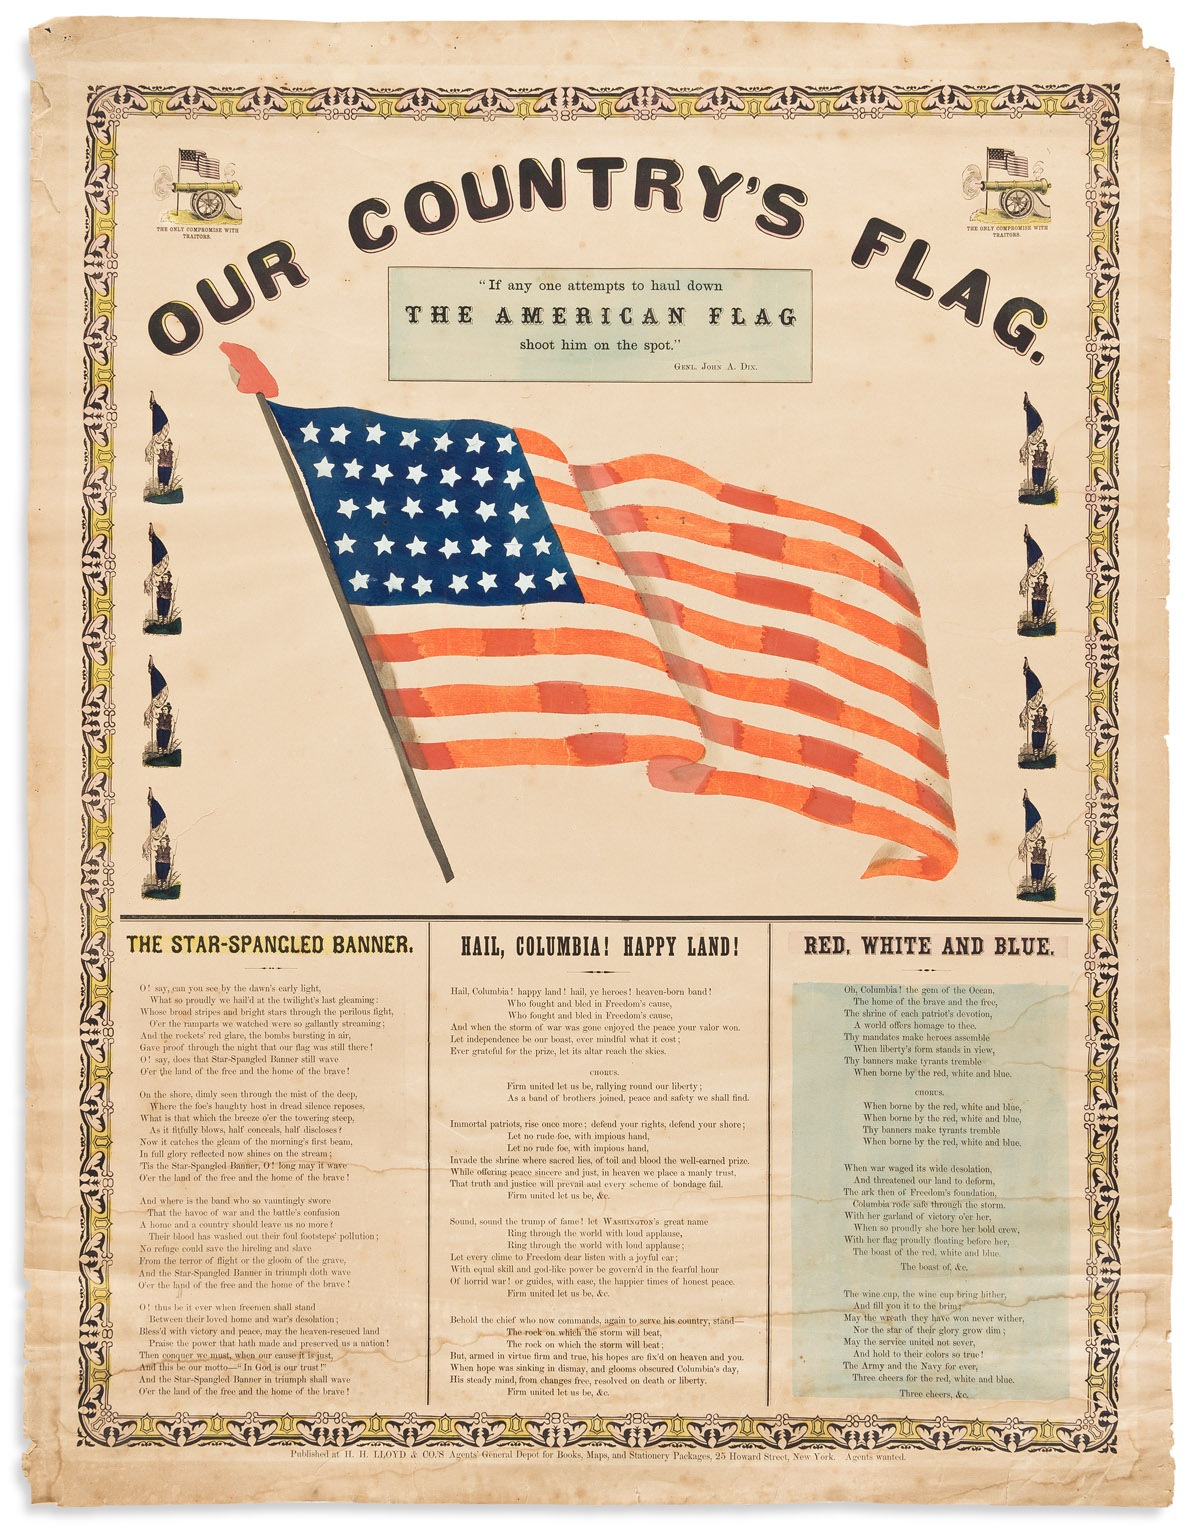 (CIVIL WAR.) Our Country’s Flag: If Anyone Attempts to Haul Down the American Flag, Shoot Him on the Spot.”